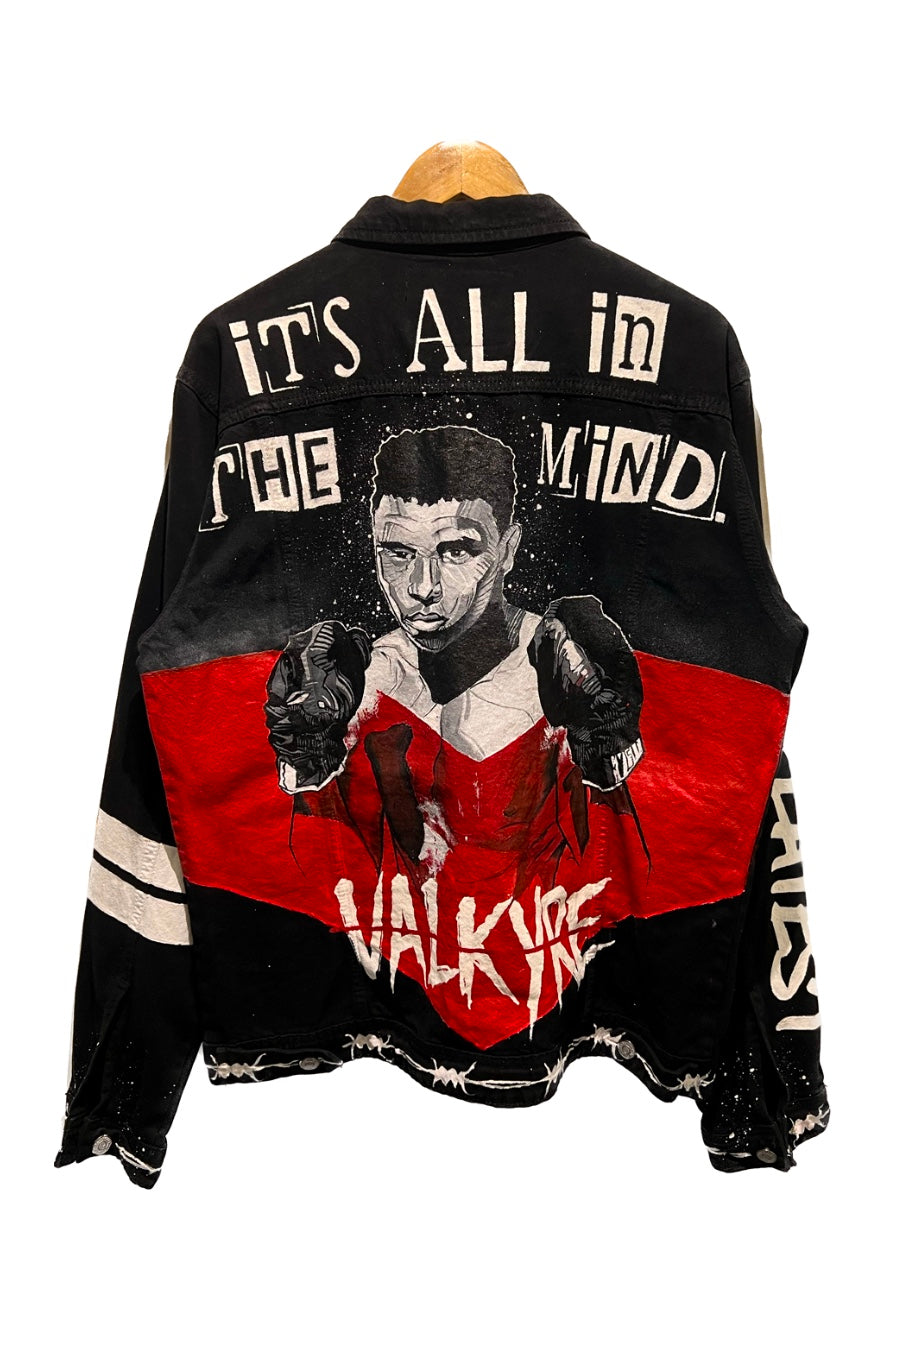 'ITS ALL IN THE MIND' VALKYRE JACKET